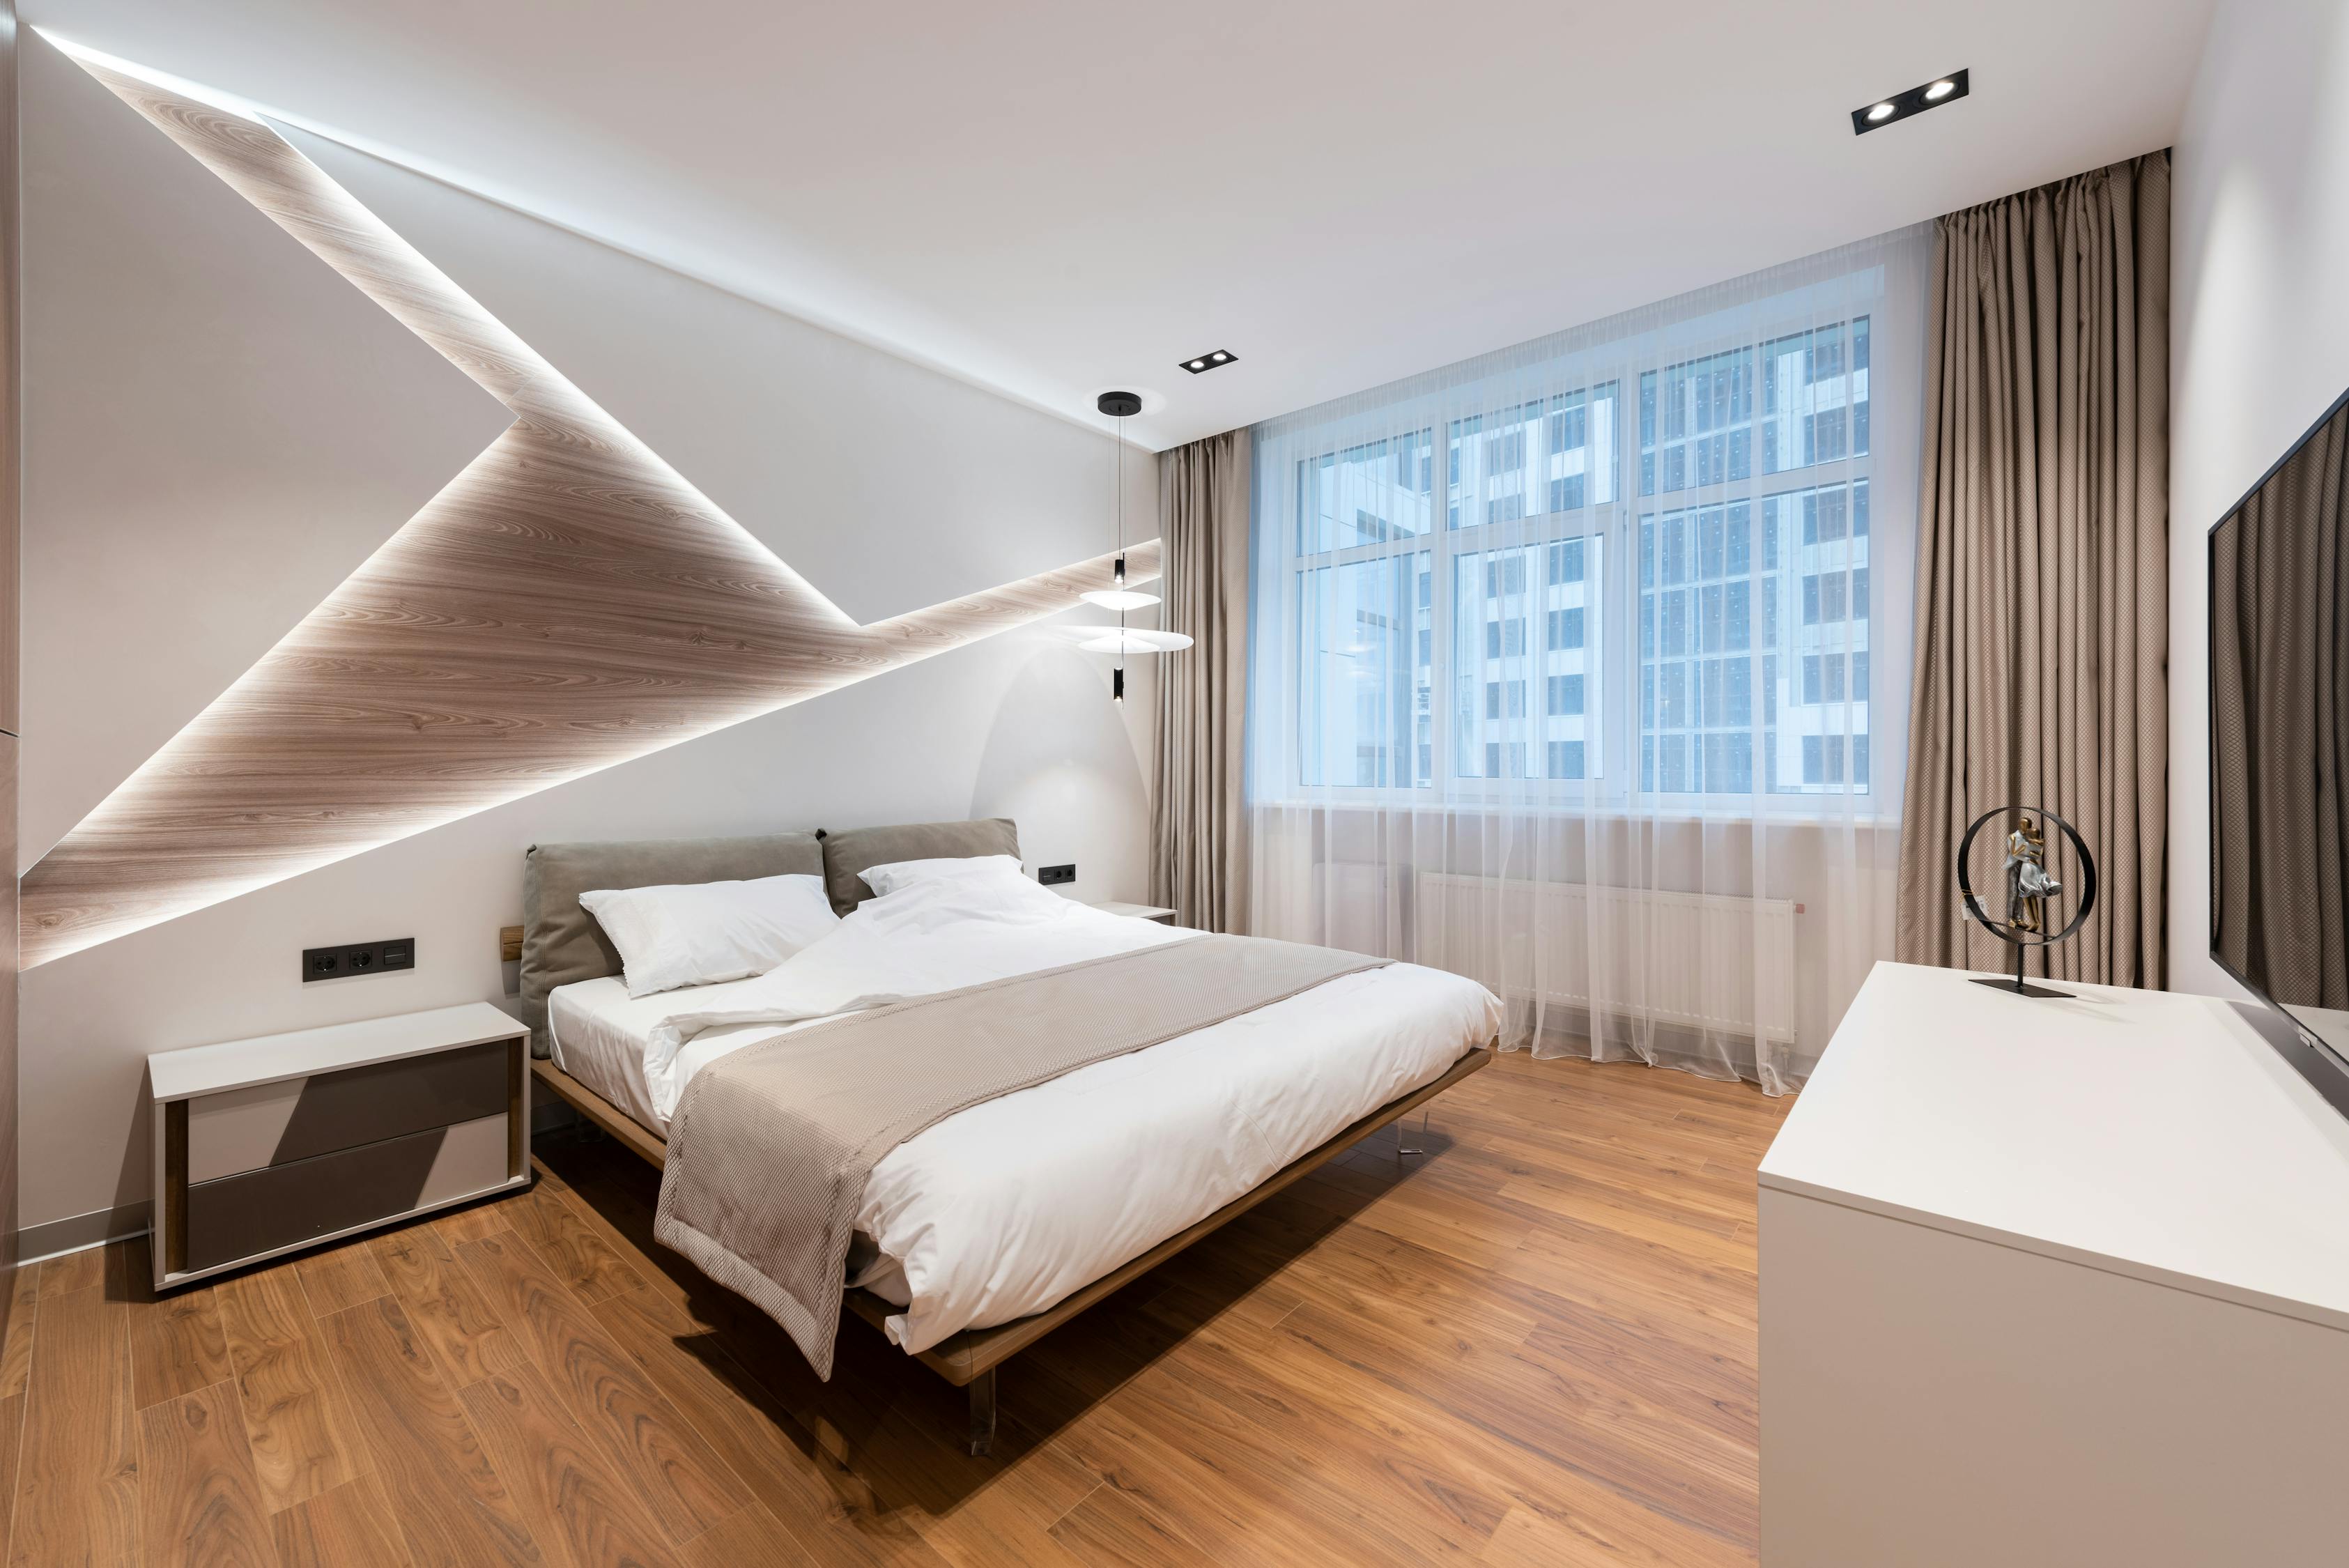 Indirect Lighting with LED Strips in a Bedroom